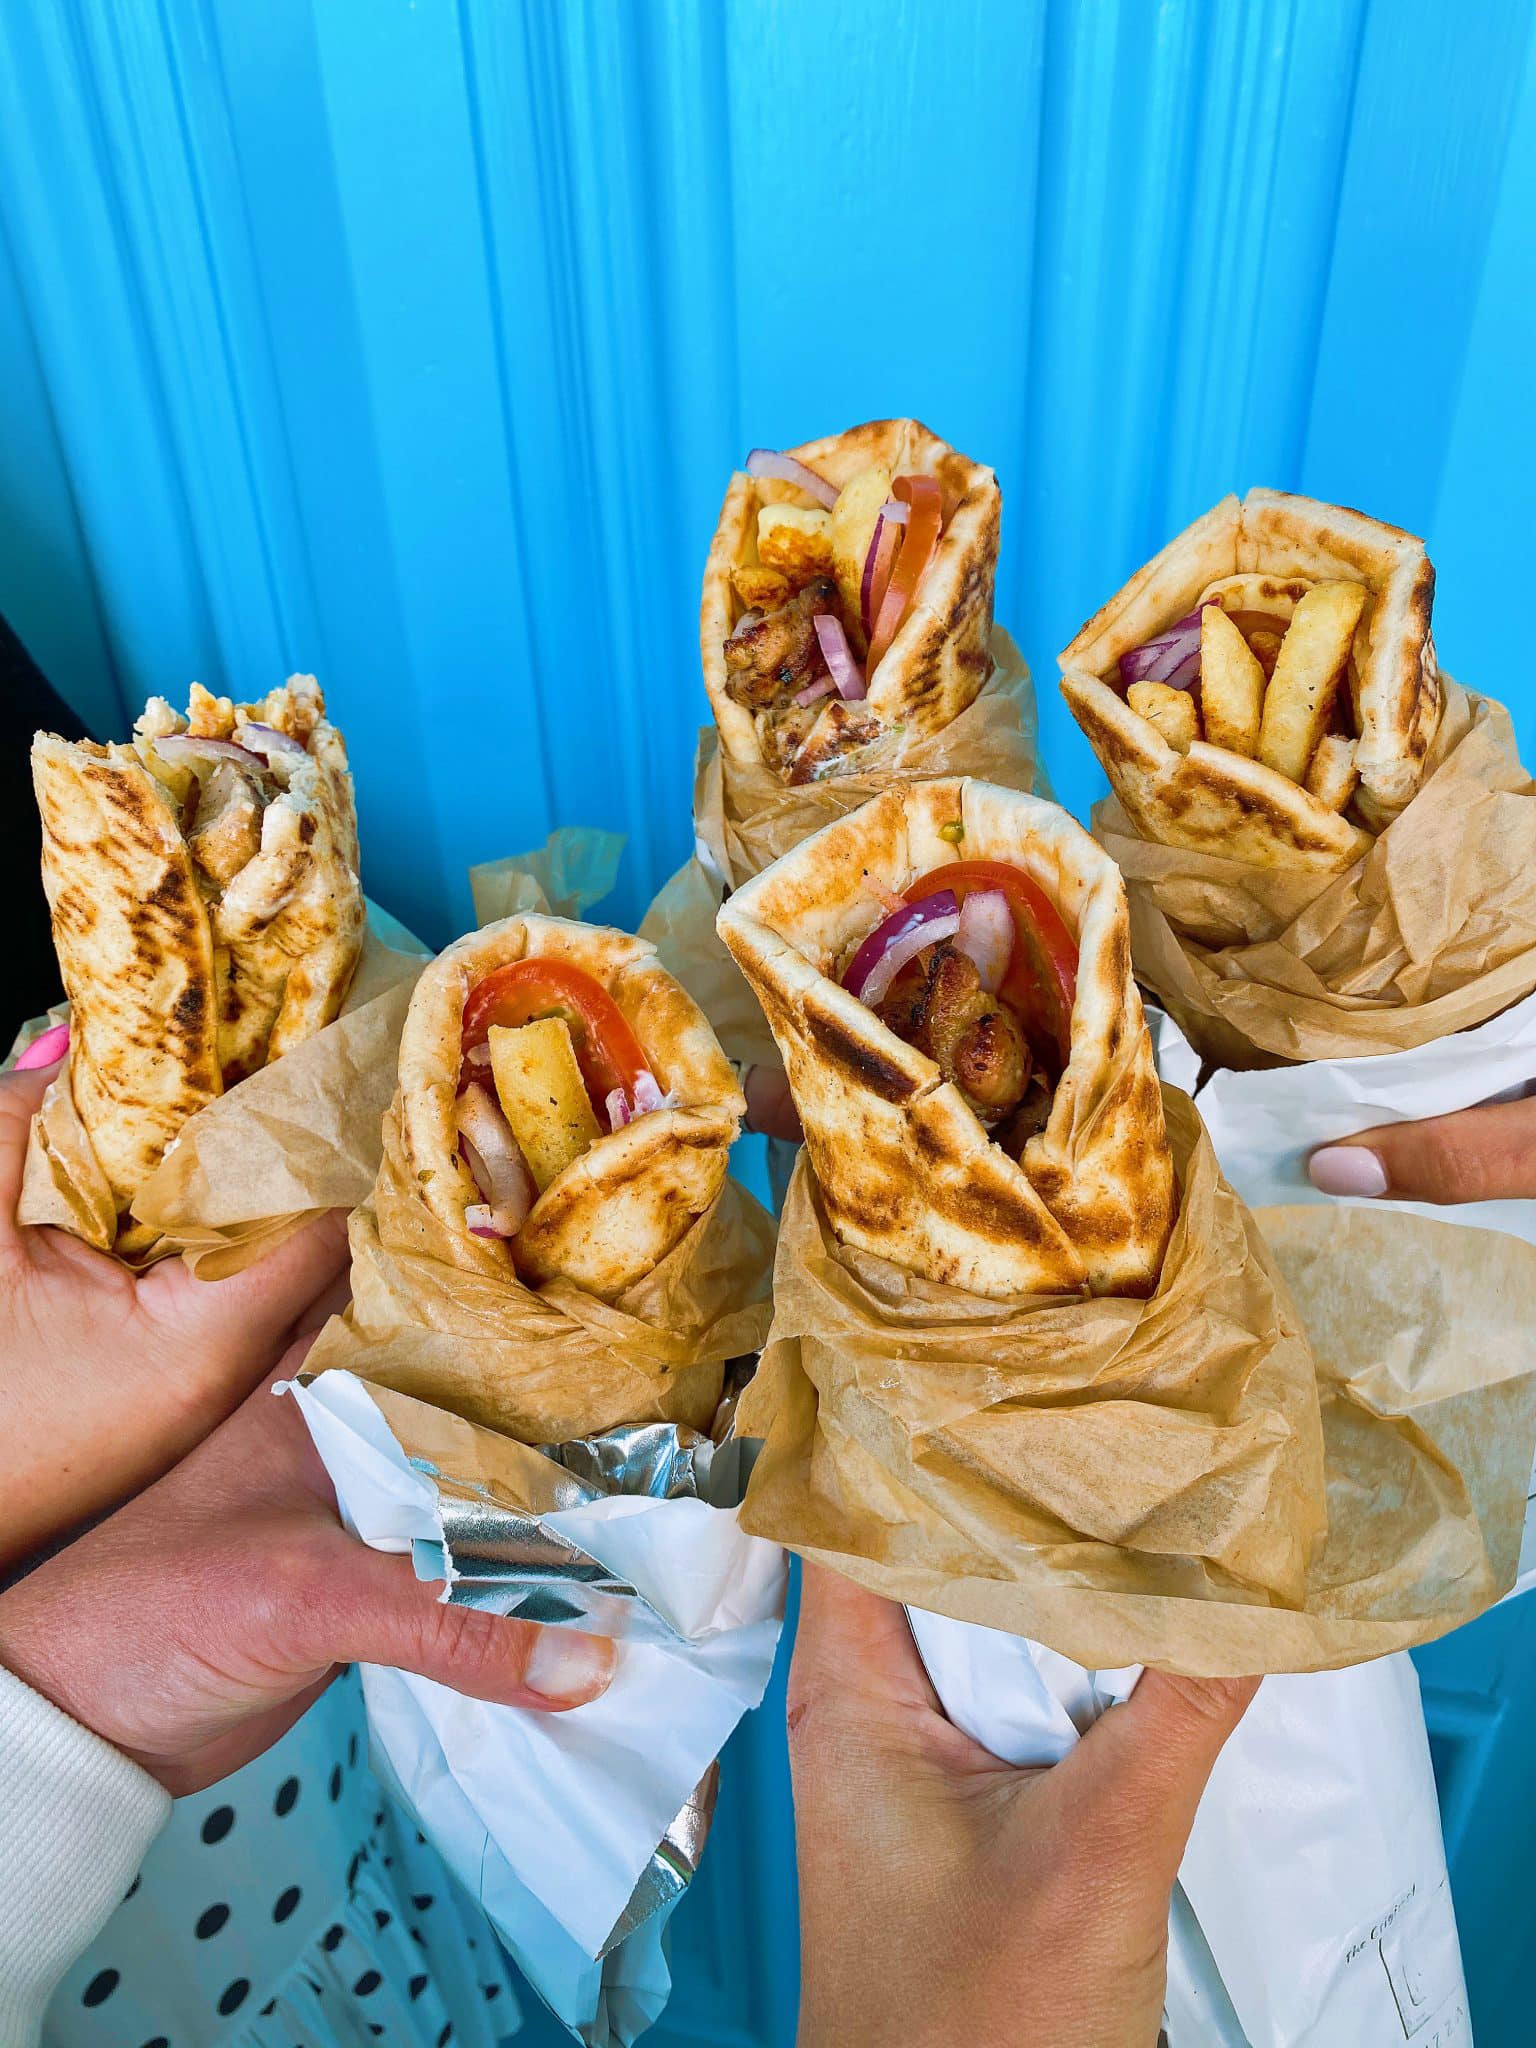 WIN a Greek feast for your friends and family, with a $200 voucher to spend at Two Greek Boys